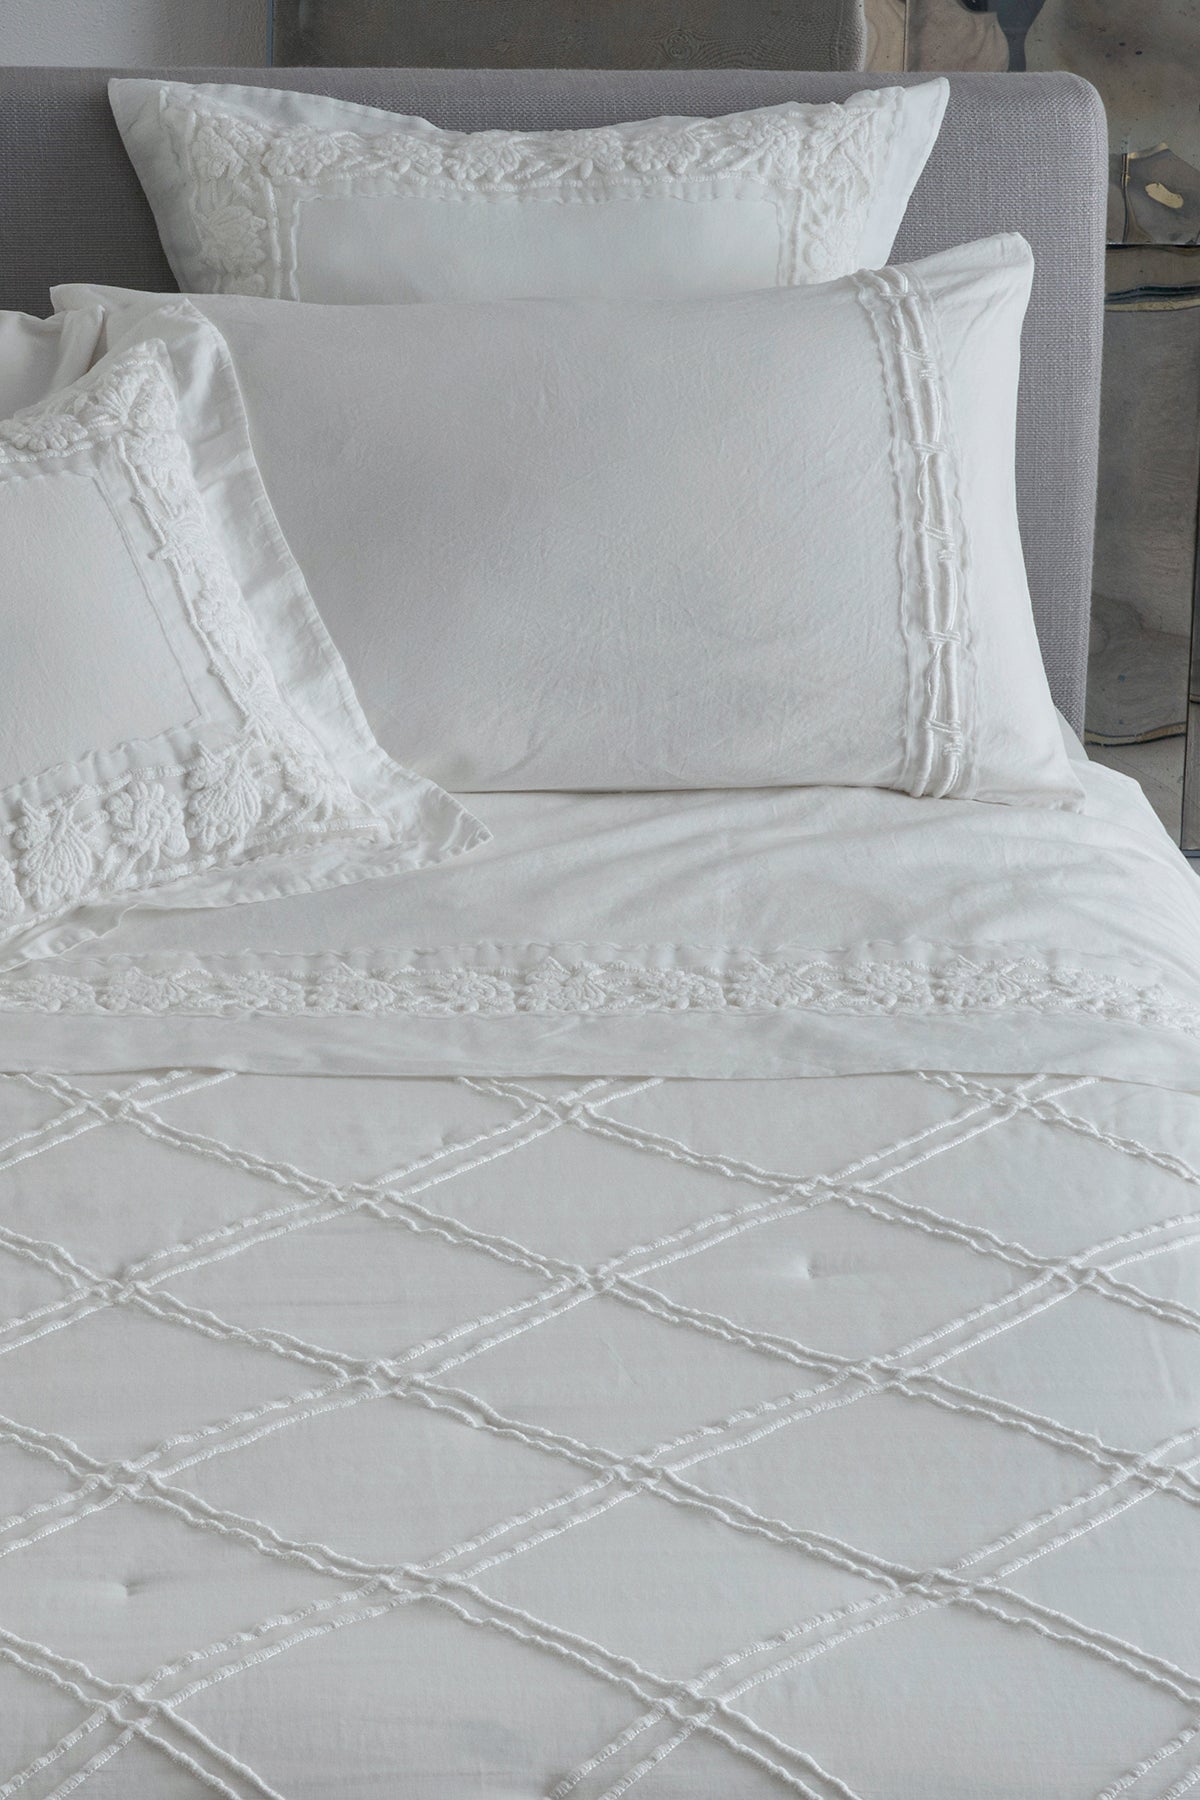 Quilted bedspread and quilt Mathilde losanghe allover